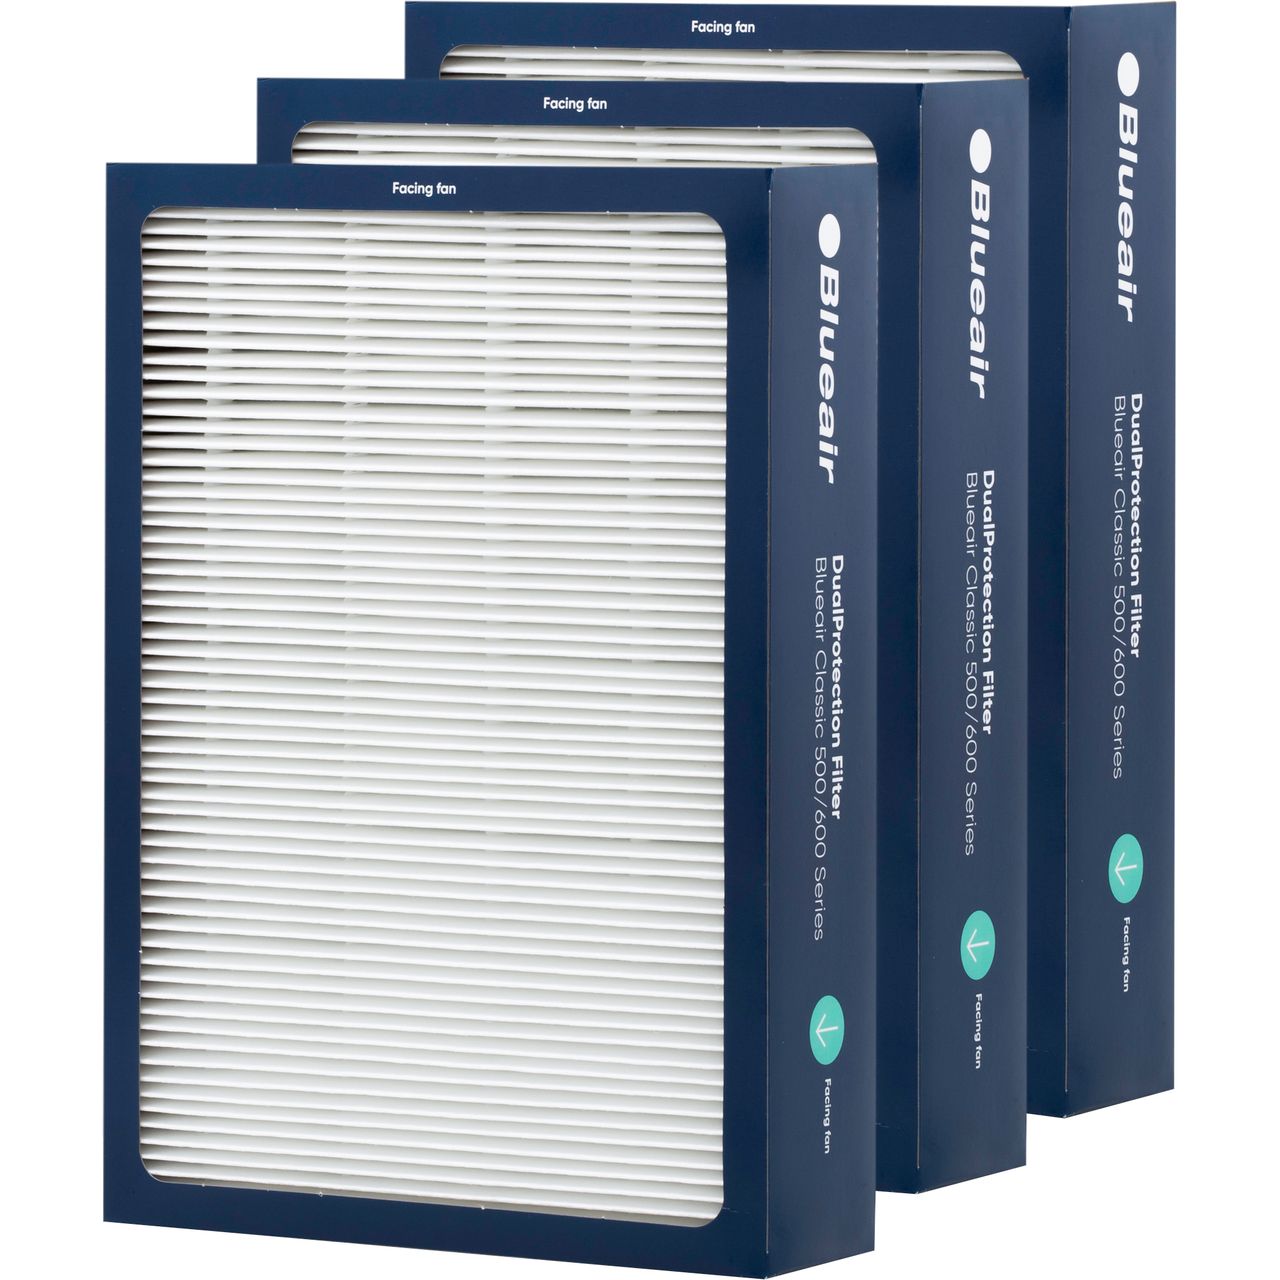 Blueair Classic 500/600 Series Particle Filter Review